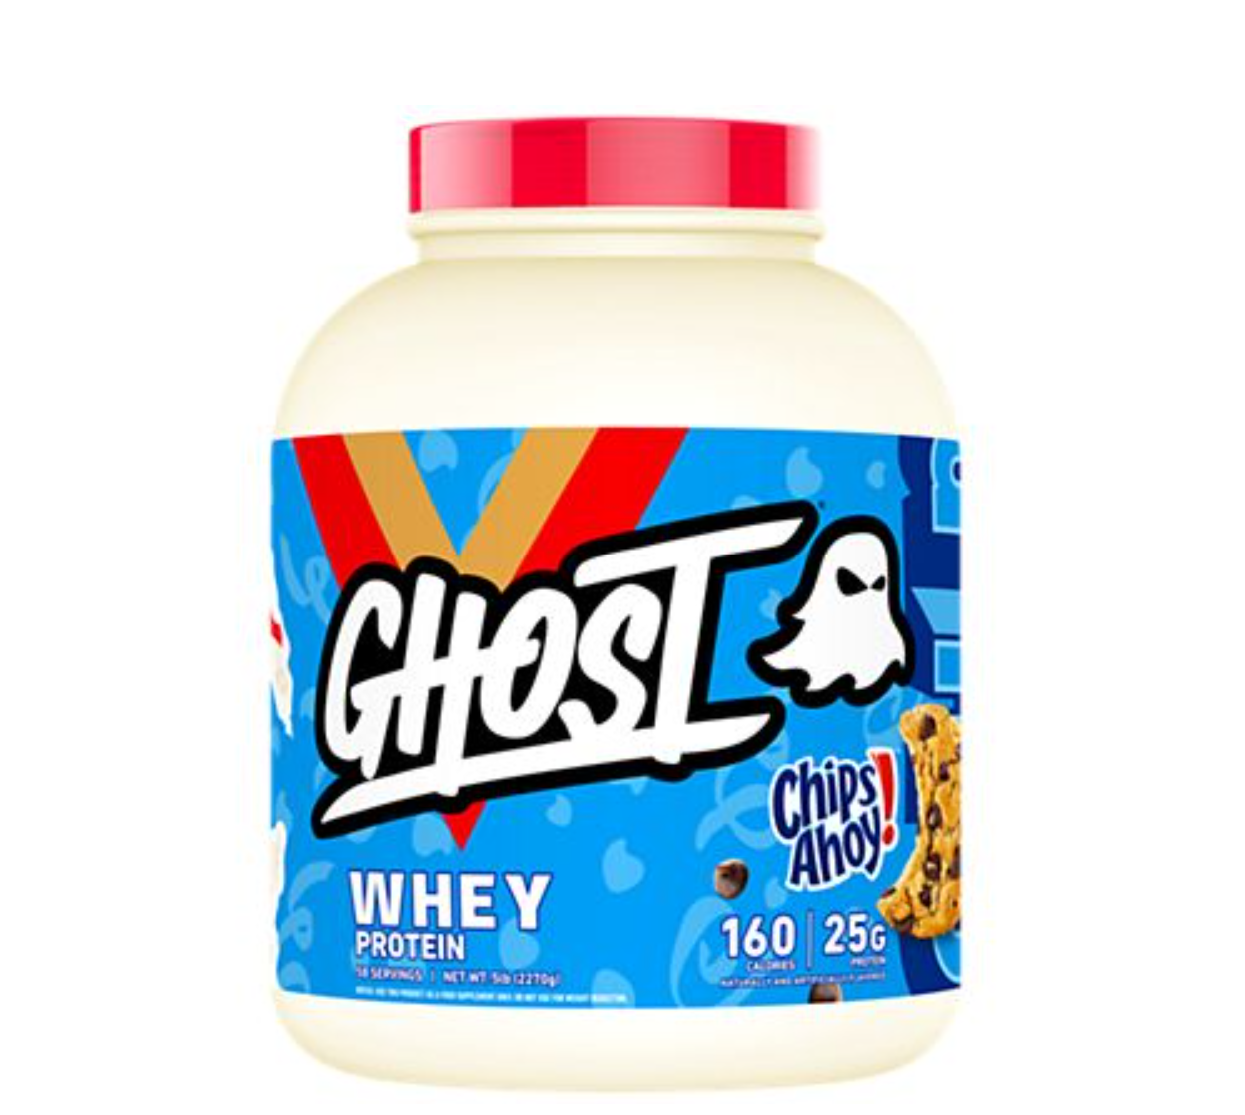 GHOST WHEY X CHIPS AHOY! 5 LB TUB-The Supplement Haven